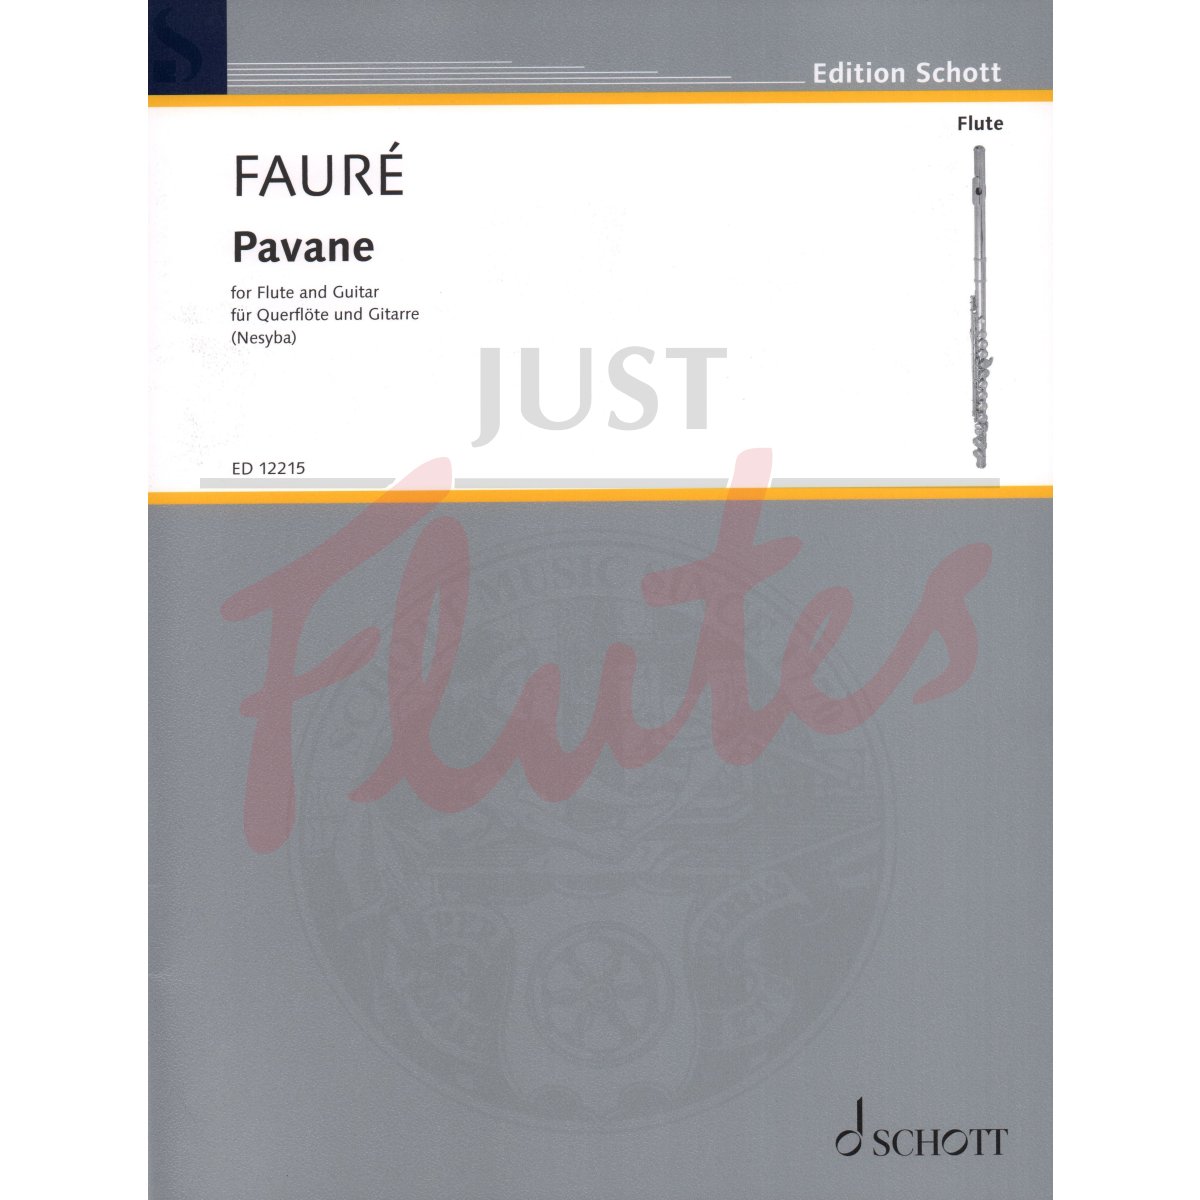 Pavane for Flute and Guitar